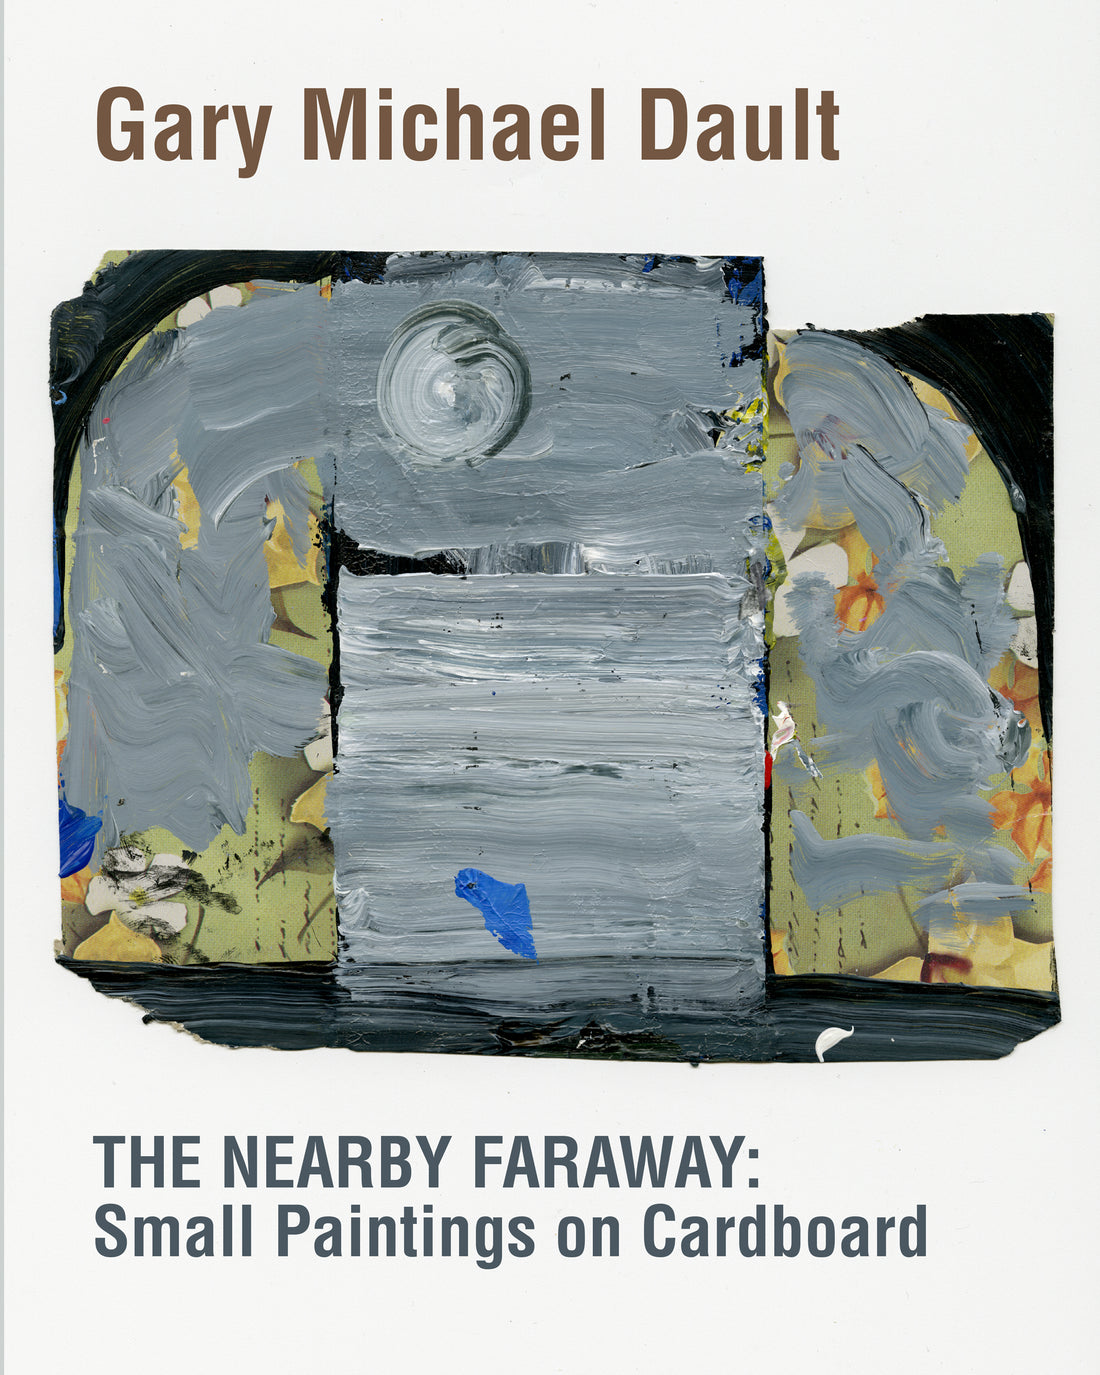 The Nearby Faraway: Small Paintings on Cardboard